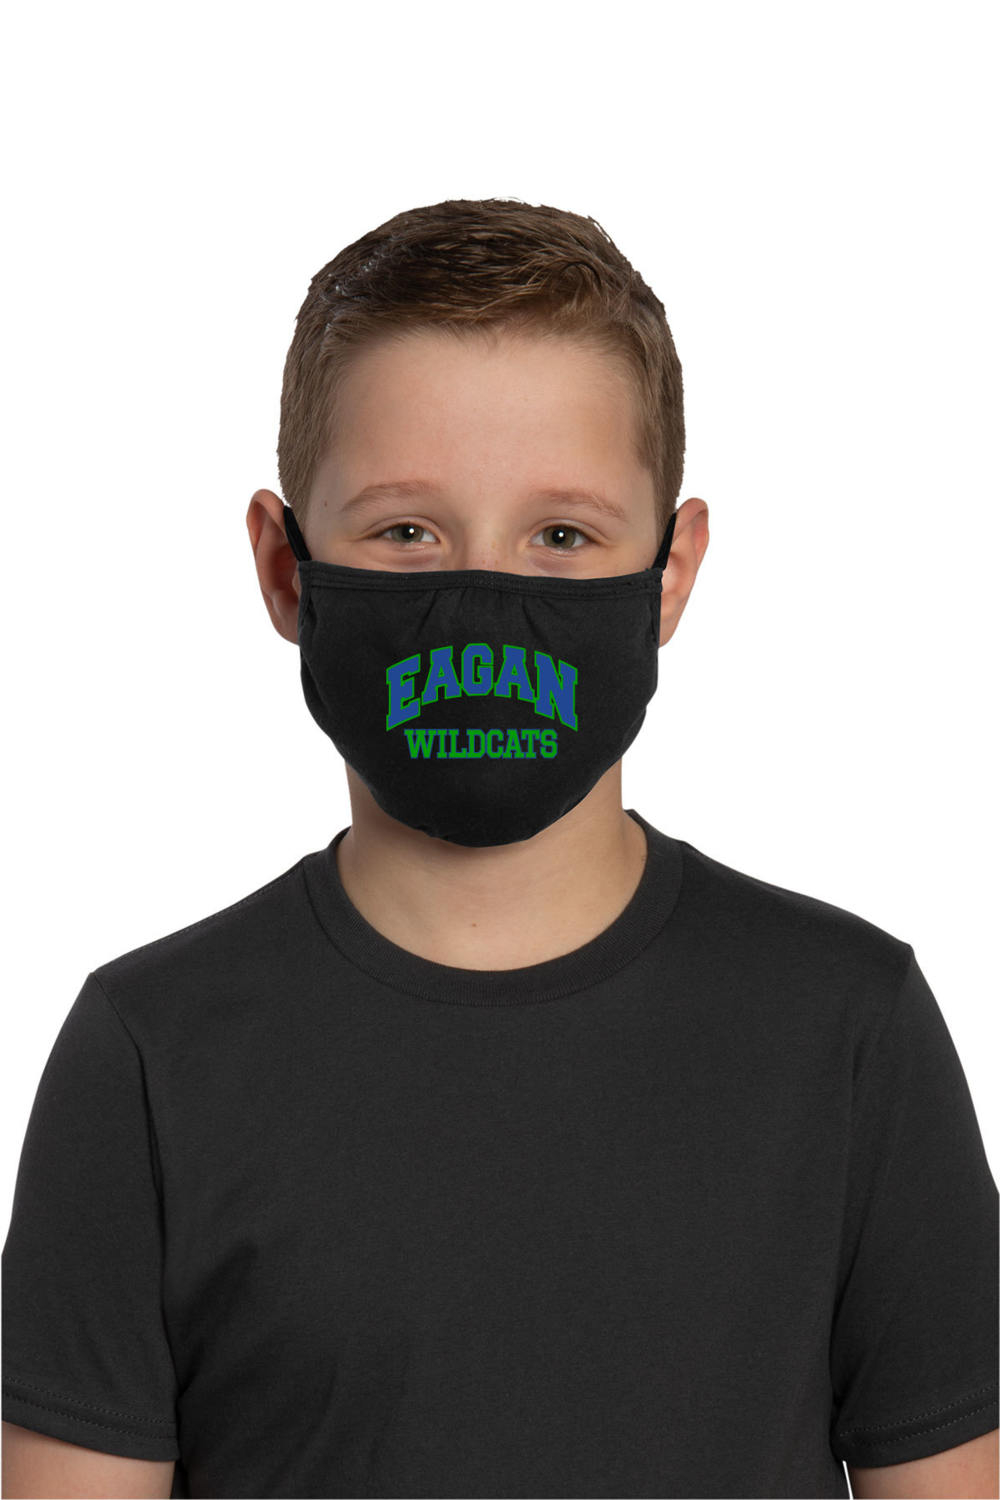 Eagan Wildcats Mask - Youth